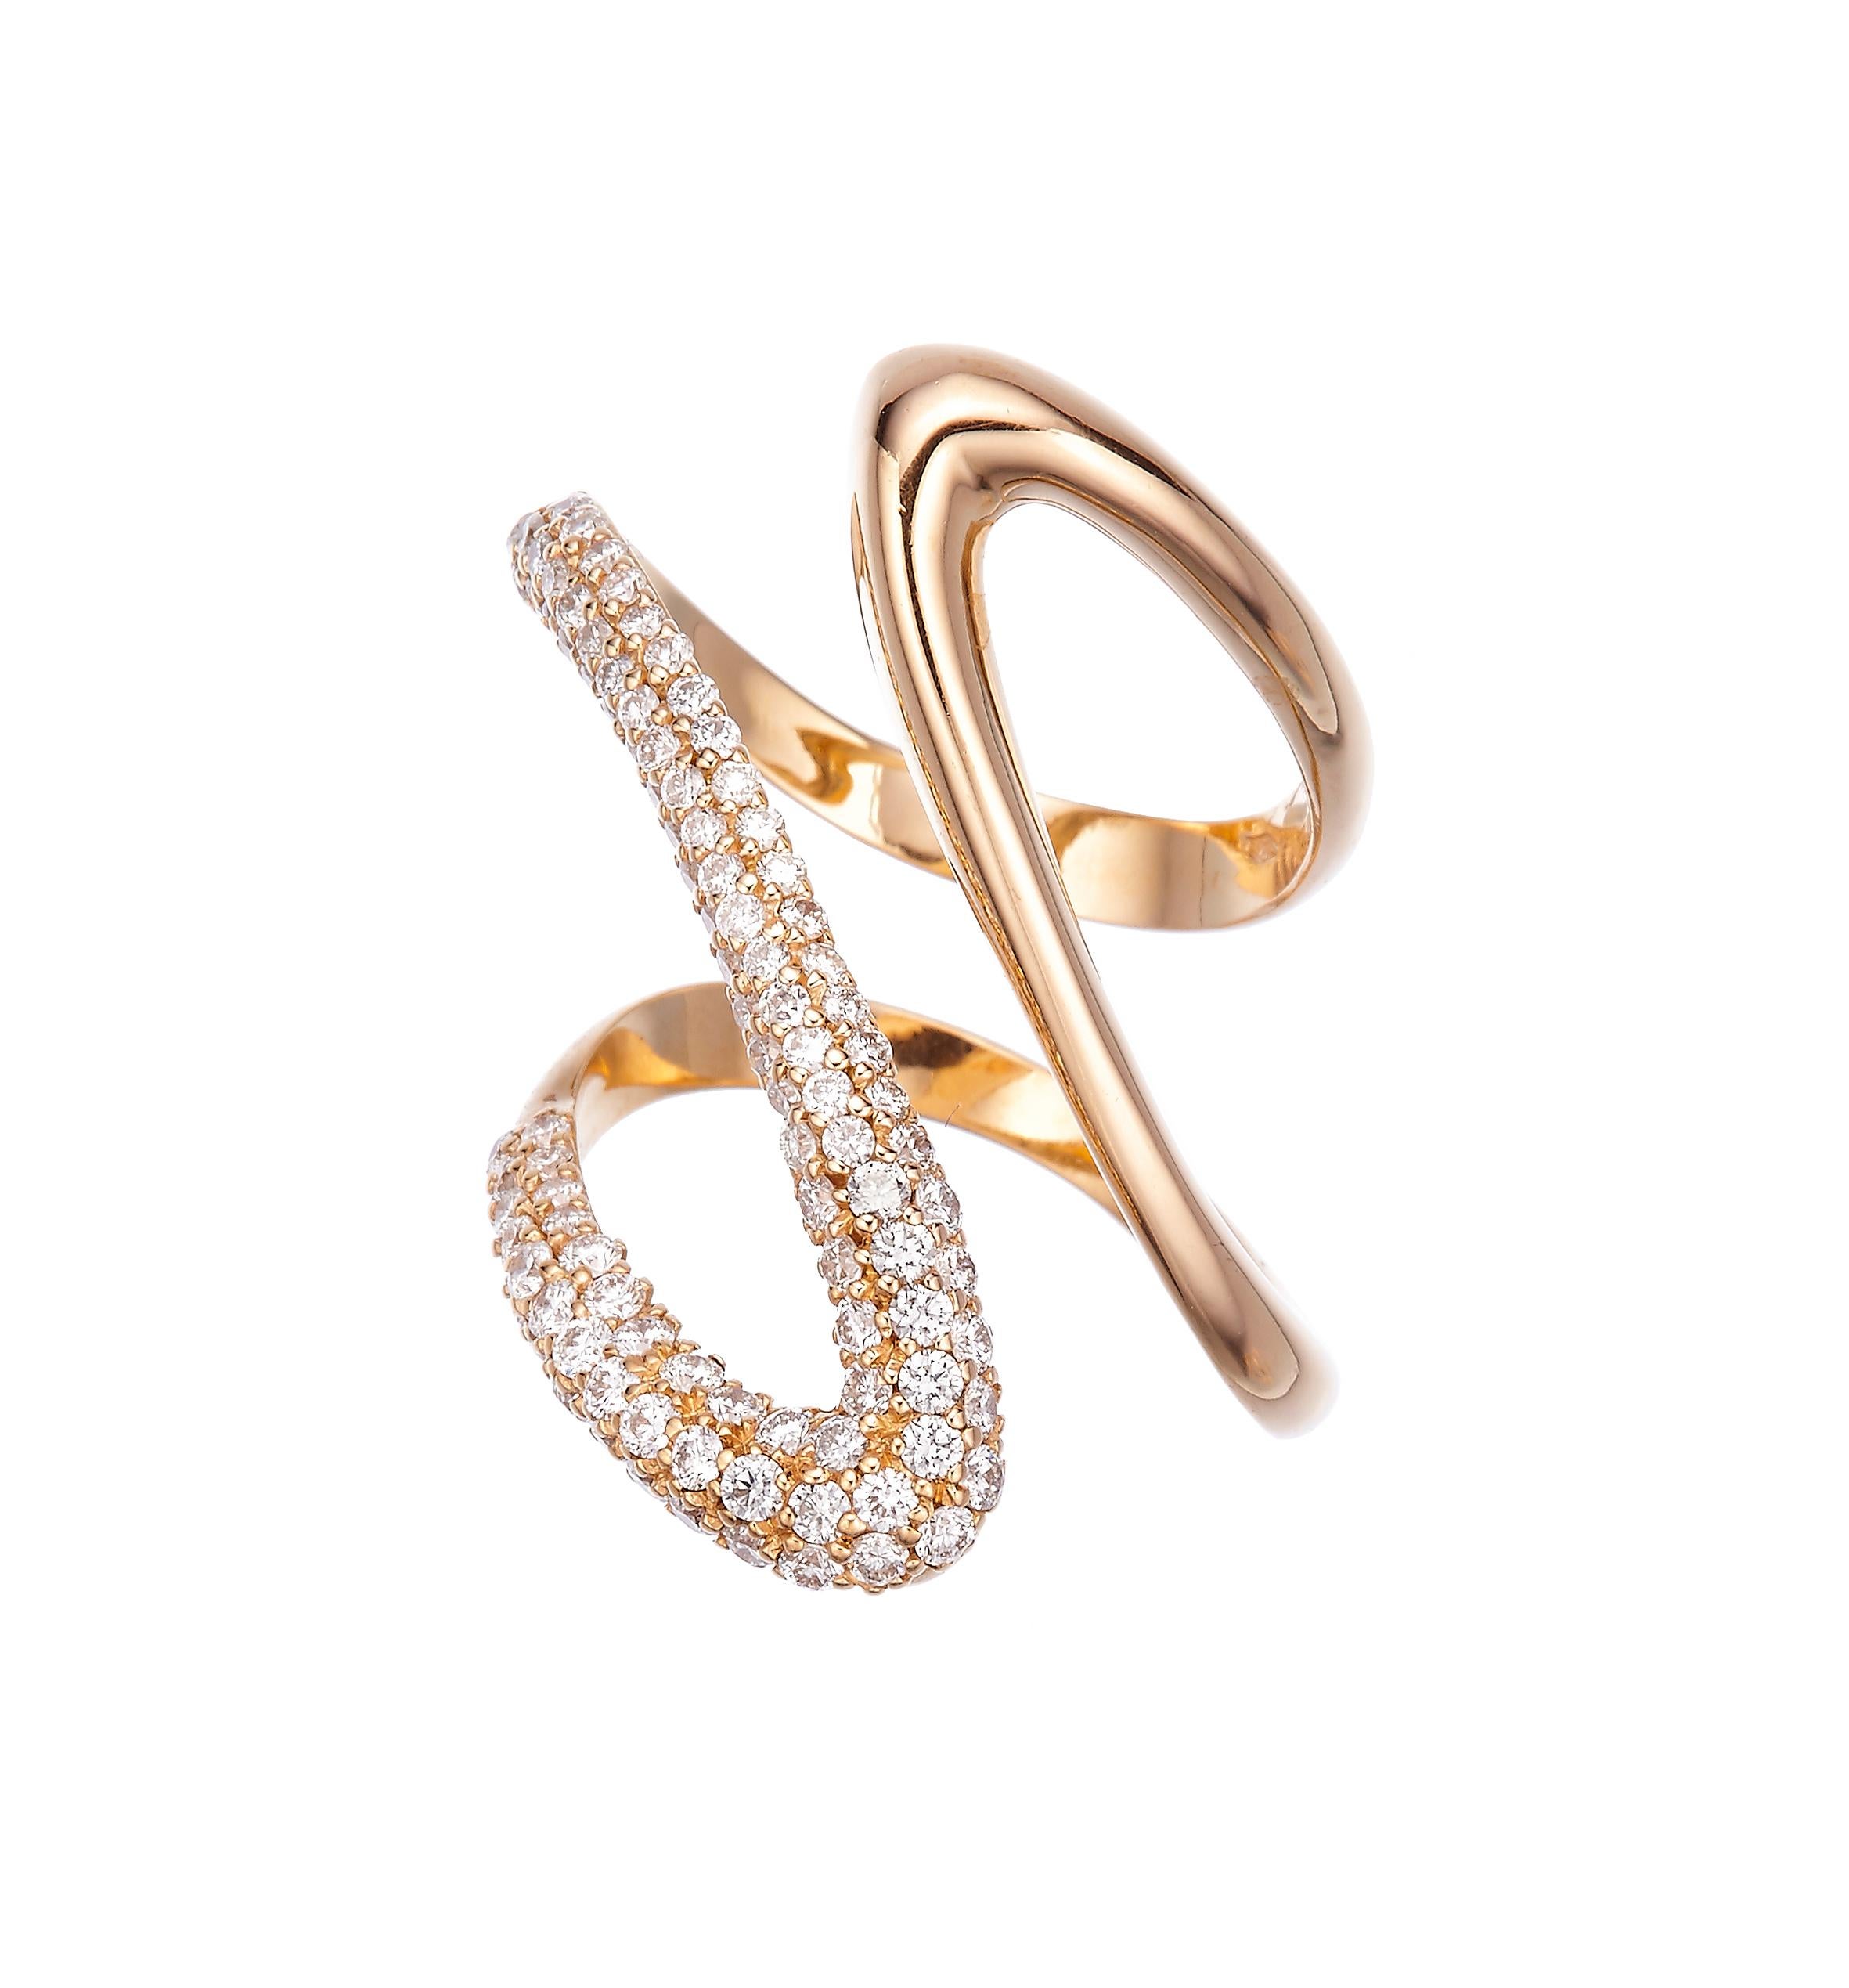 Contemporary Beatrice Barzaghi Awarded 9 Ct Diamond Pave Gold Clamper Bracelet For Sale 7